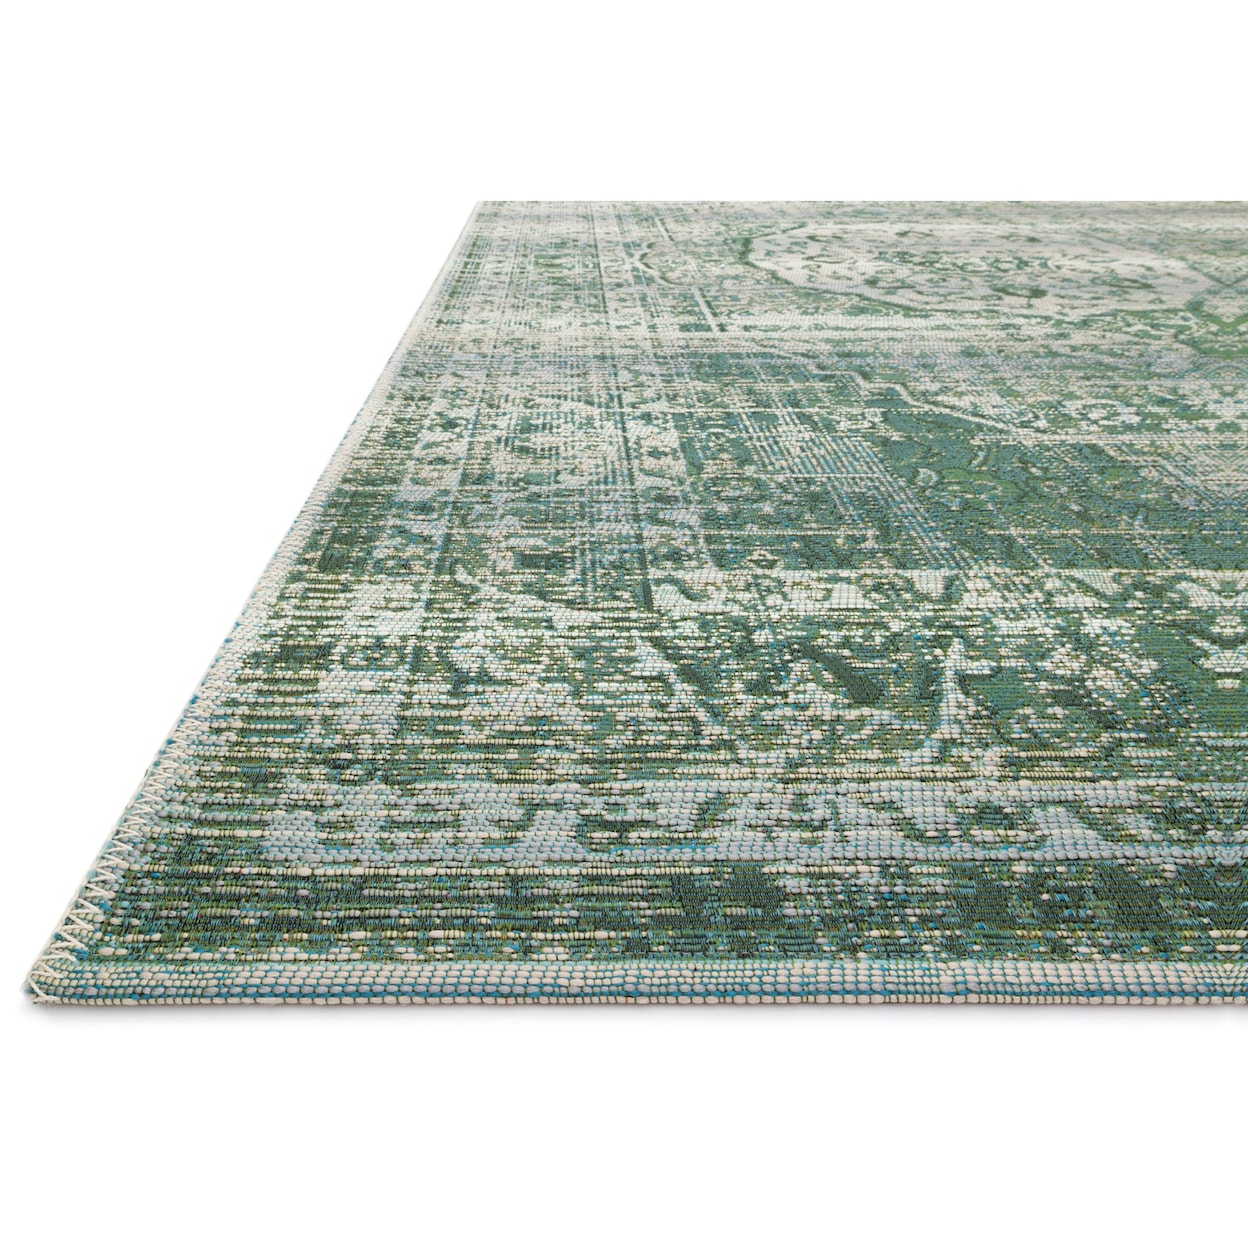 Reeds Rugs Mika 6'7" x 9'4" Green / Mist Rug